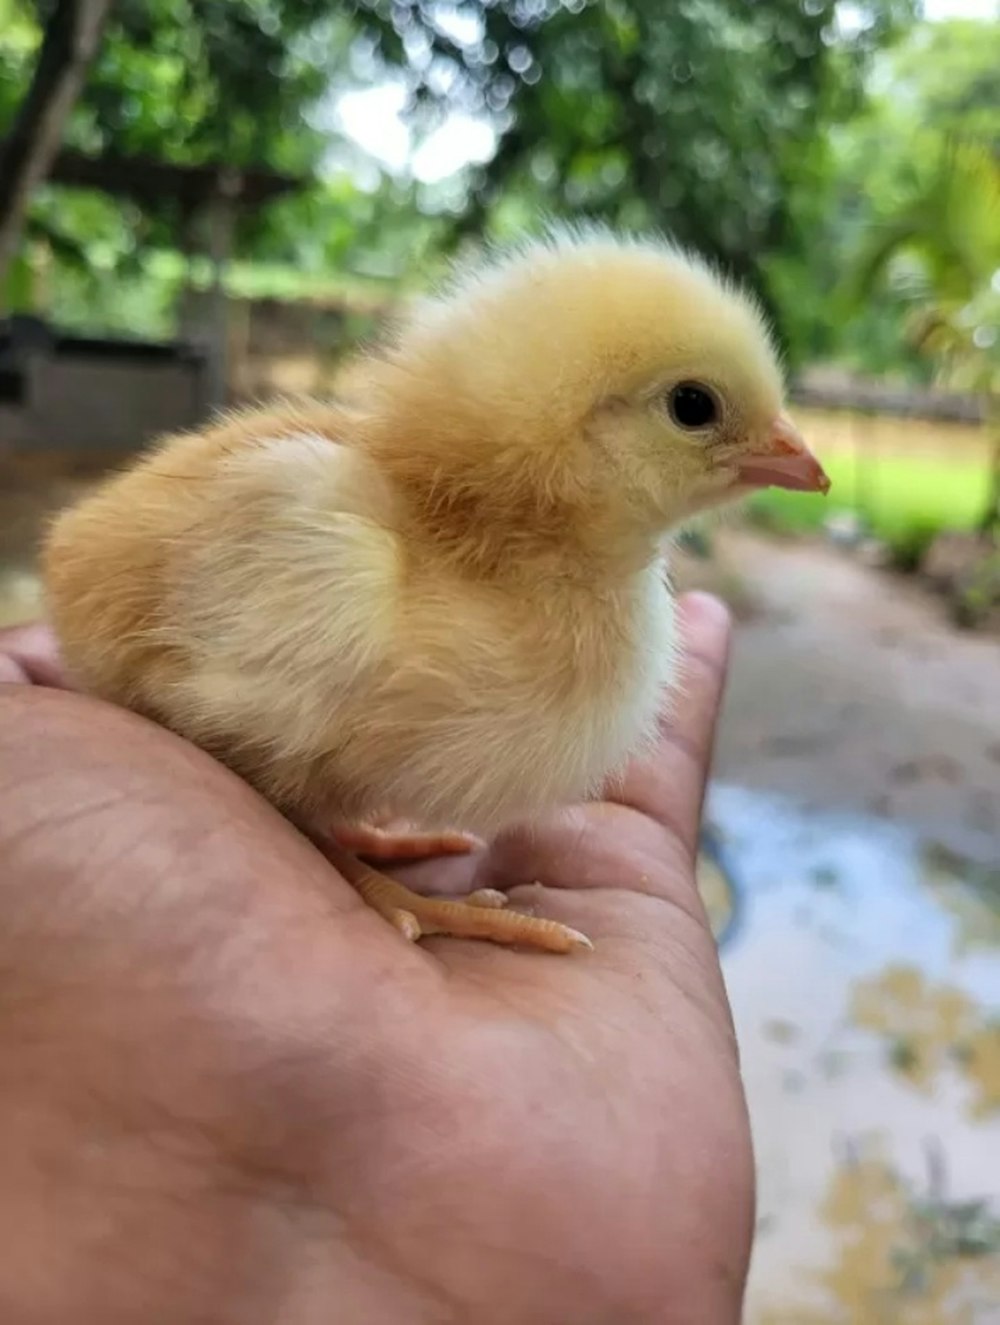 a small yellow chick on a person's hand